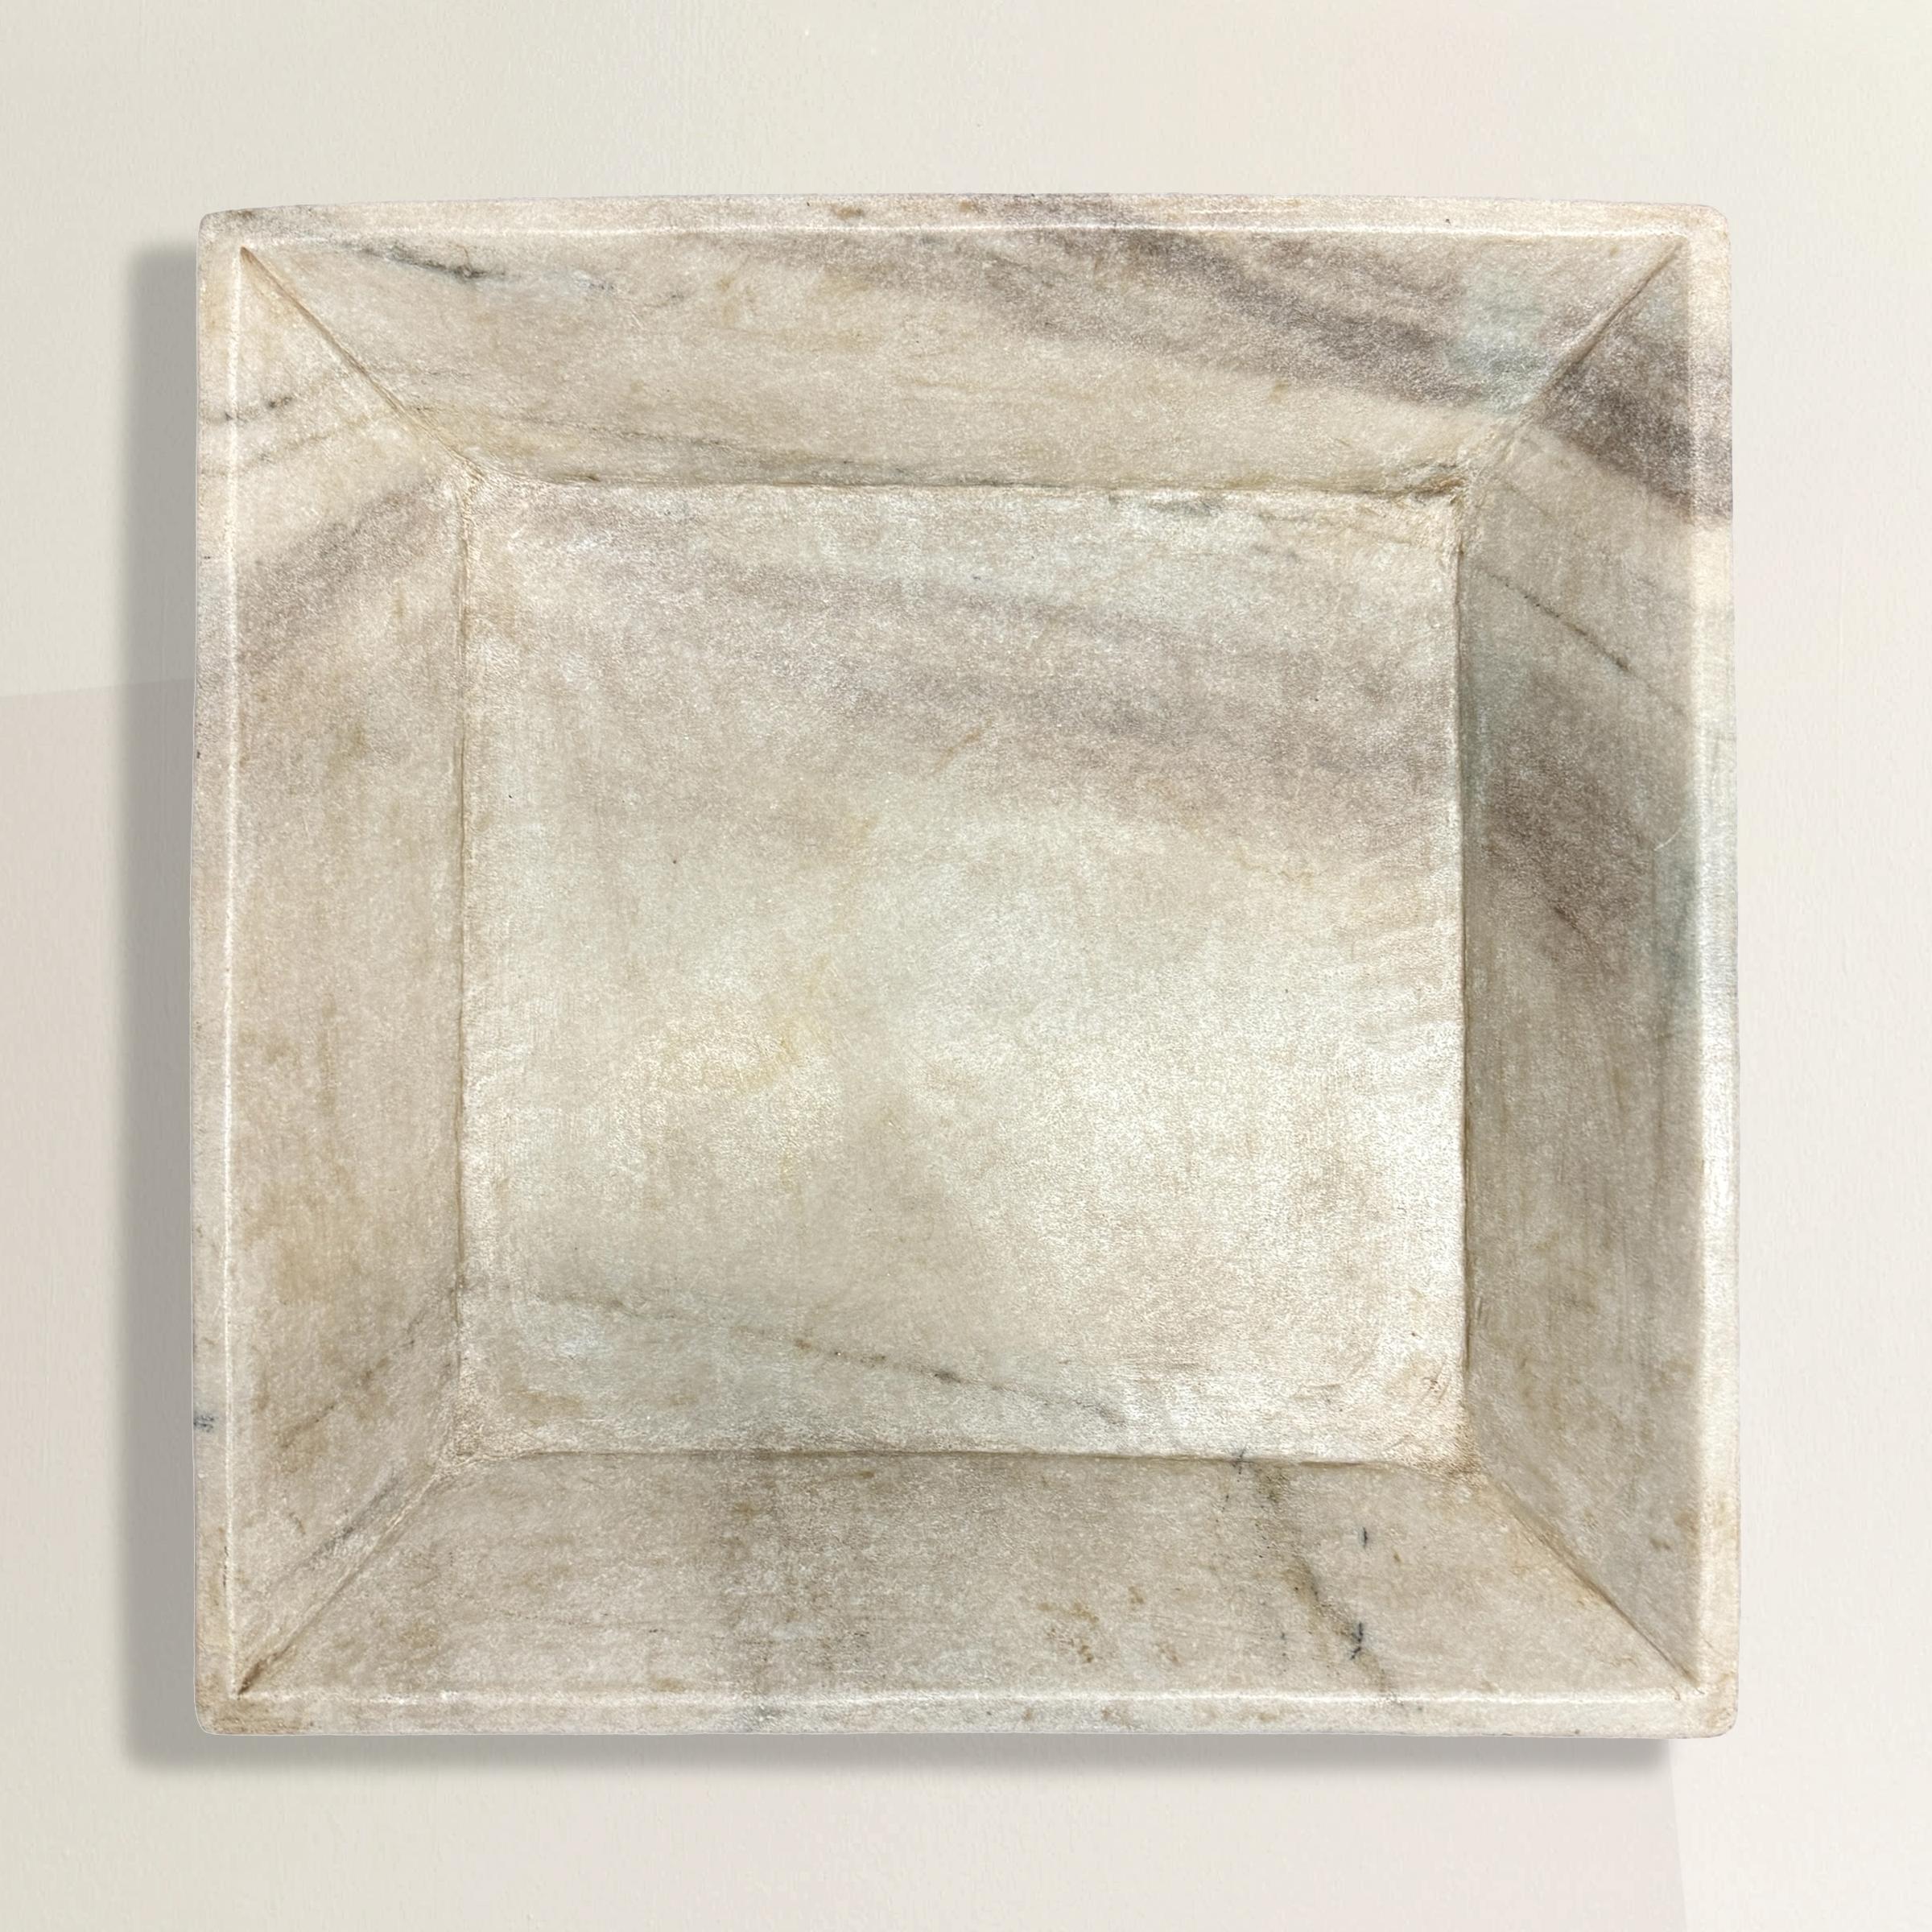 This rather large hand-carved white marble tray is a statement piece of exceptional beauty and craftsmanship. Its square form with tall tapered sides provides both elegance and practicality, while the wonderful beige and gray grain movement in the